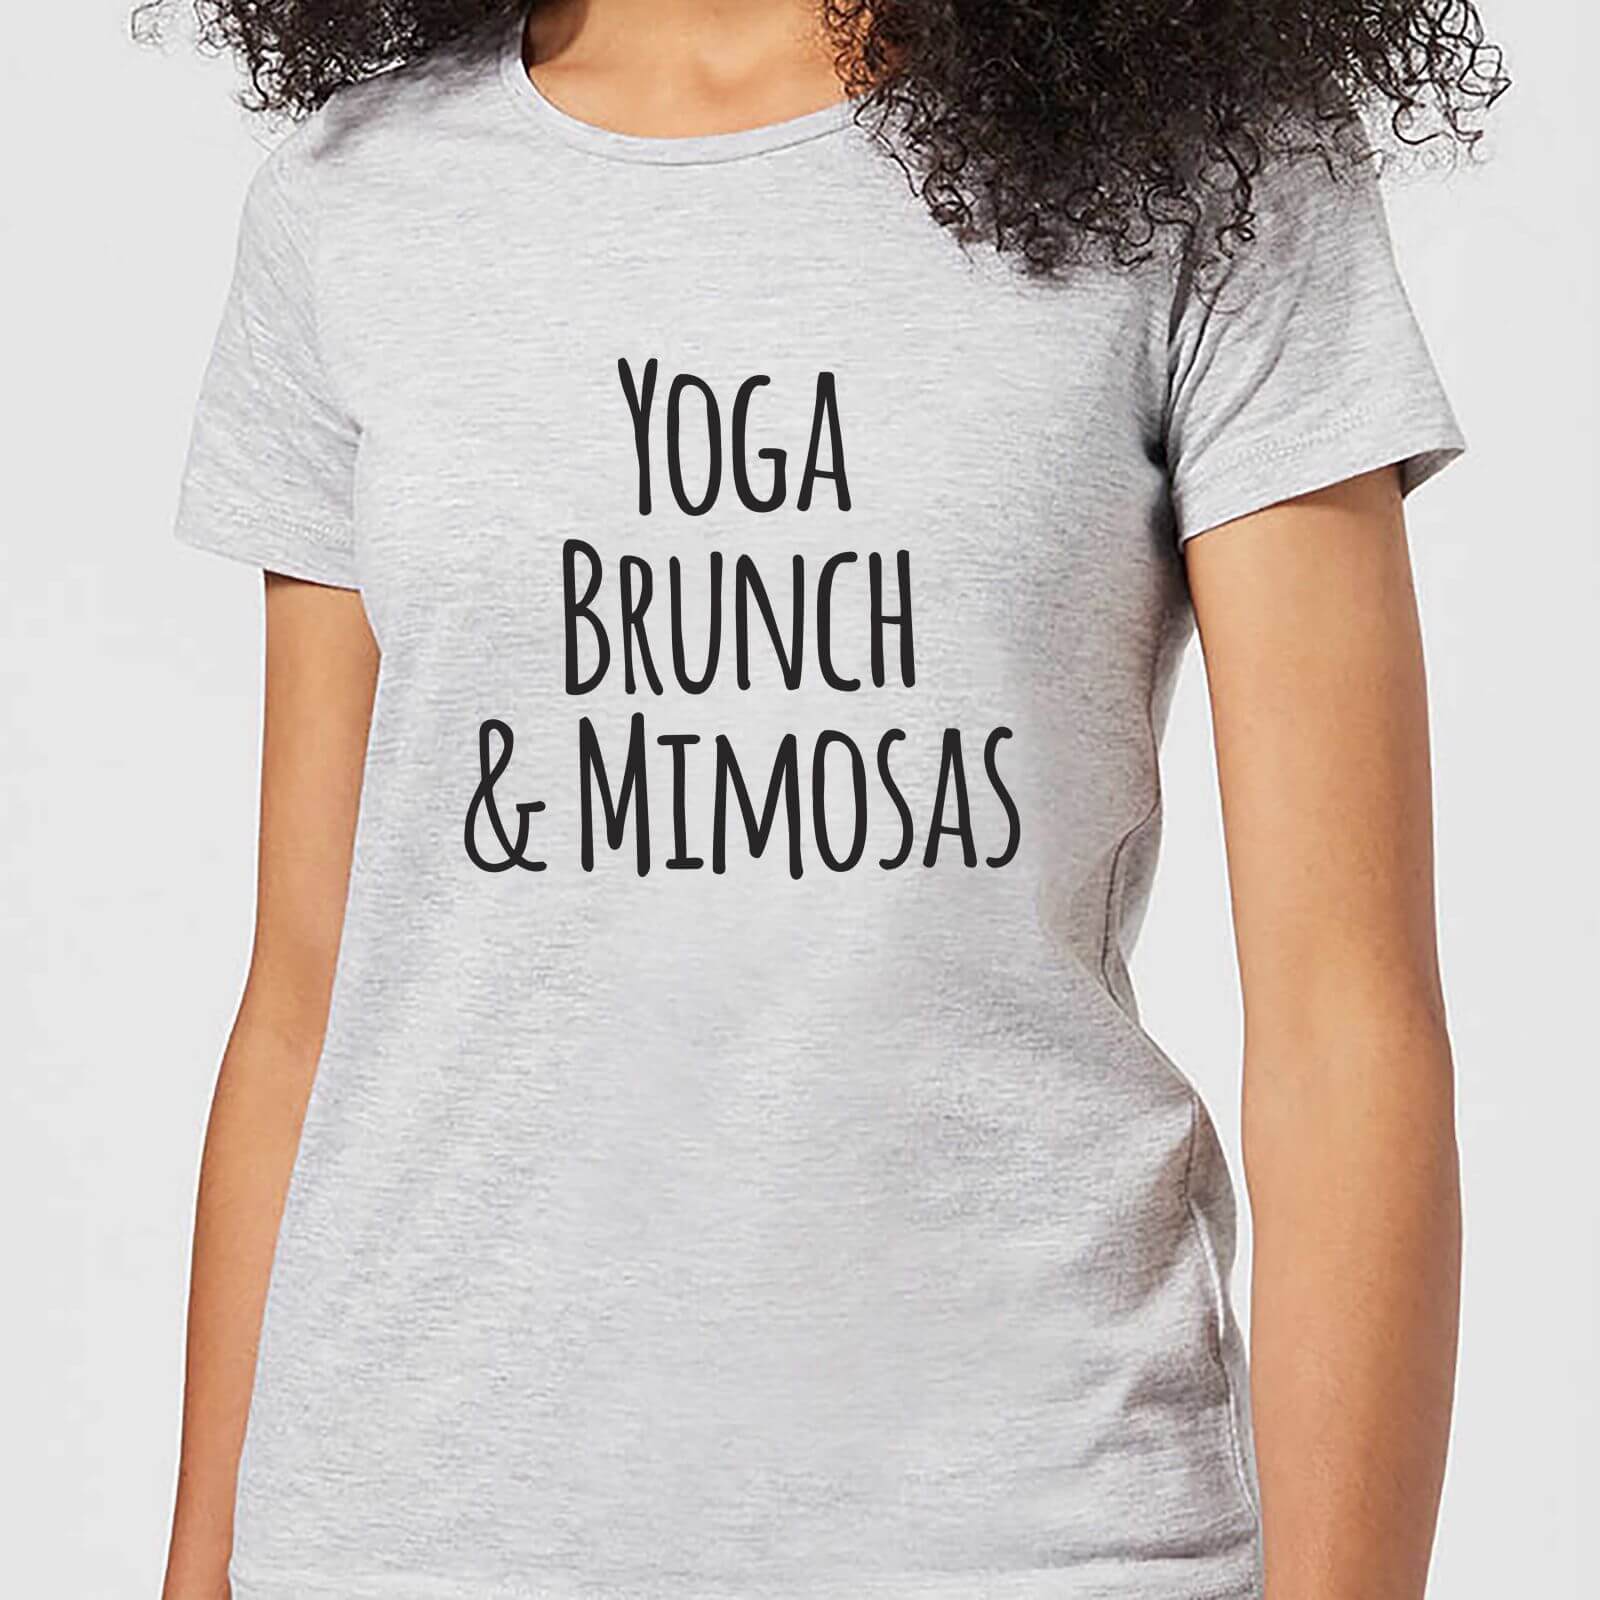 Fitness and Loungewear Yoga Brunch and Mimosas Women's T-Shirt - Grey - 4XL - Grey